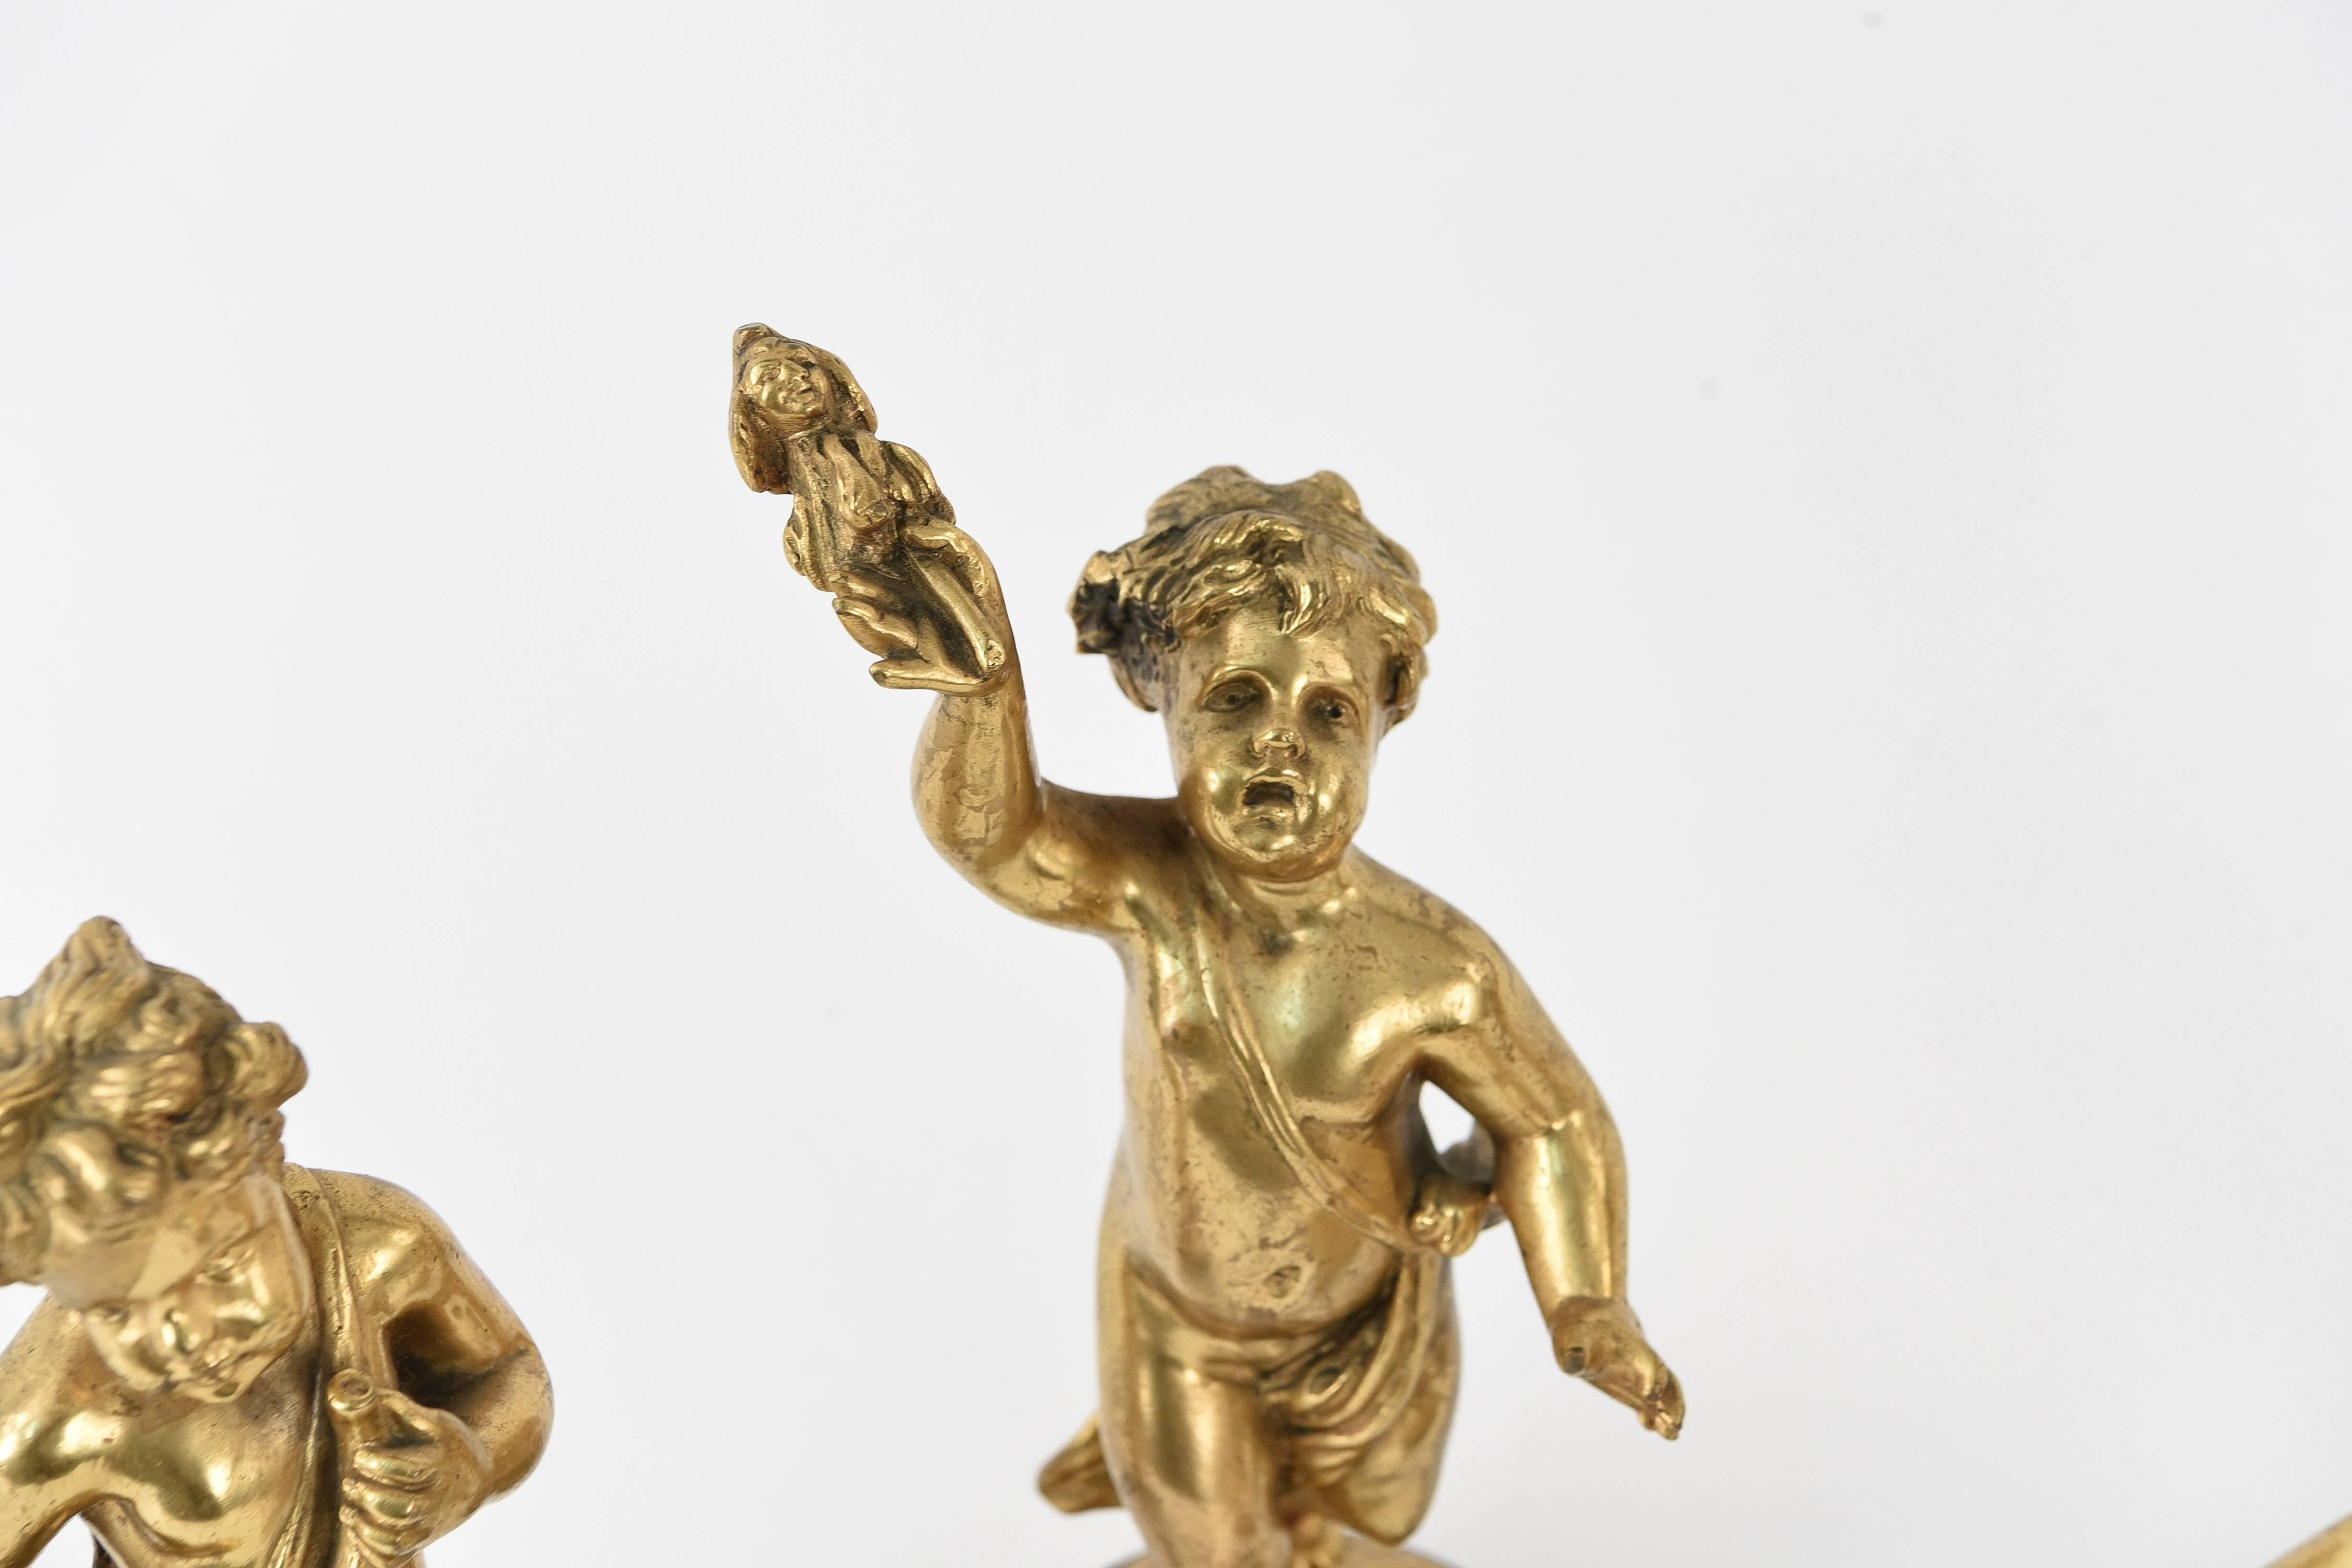 Signed illegibly. These precious gilt bronze cherubs are depicted playing instruments. The set can be used together to create a charming scene, but each piece is able to be used on its own as a beautiful little sculpture. These would be a fun